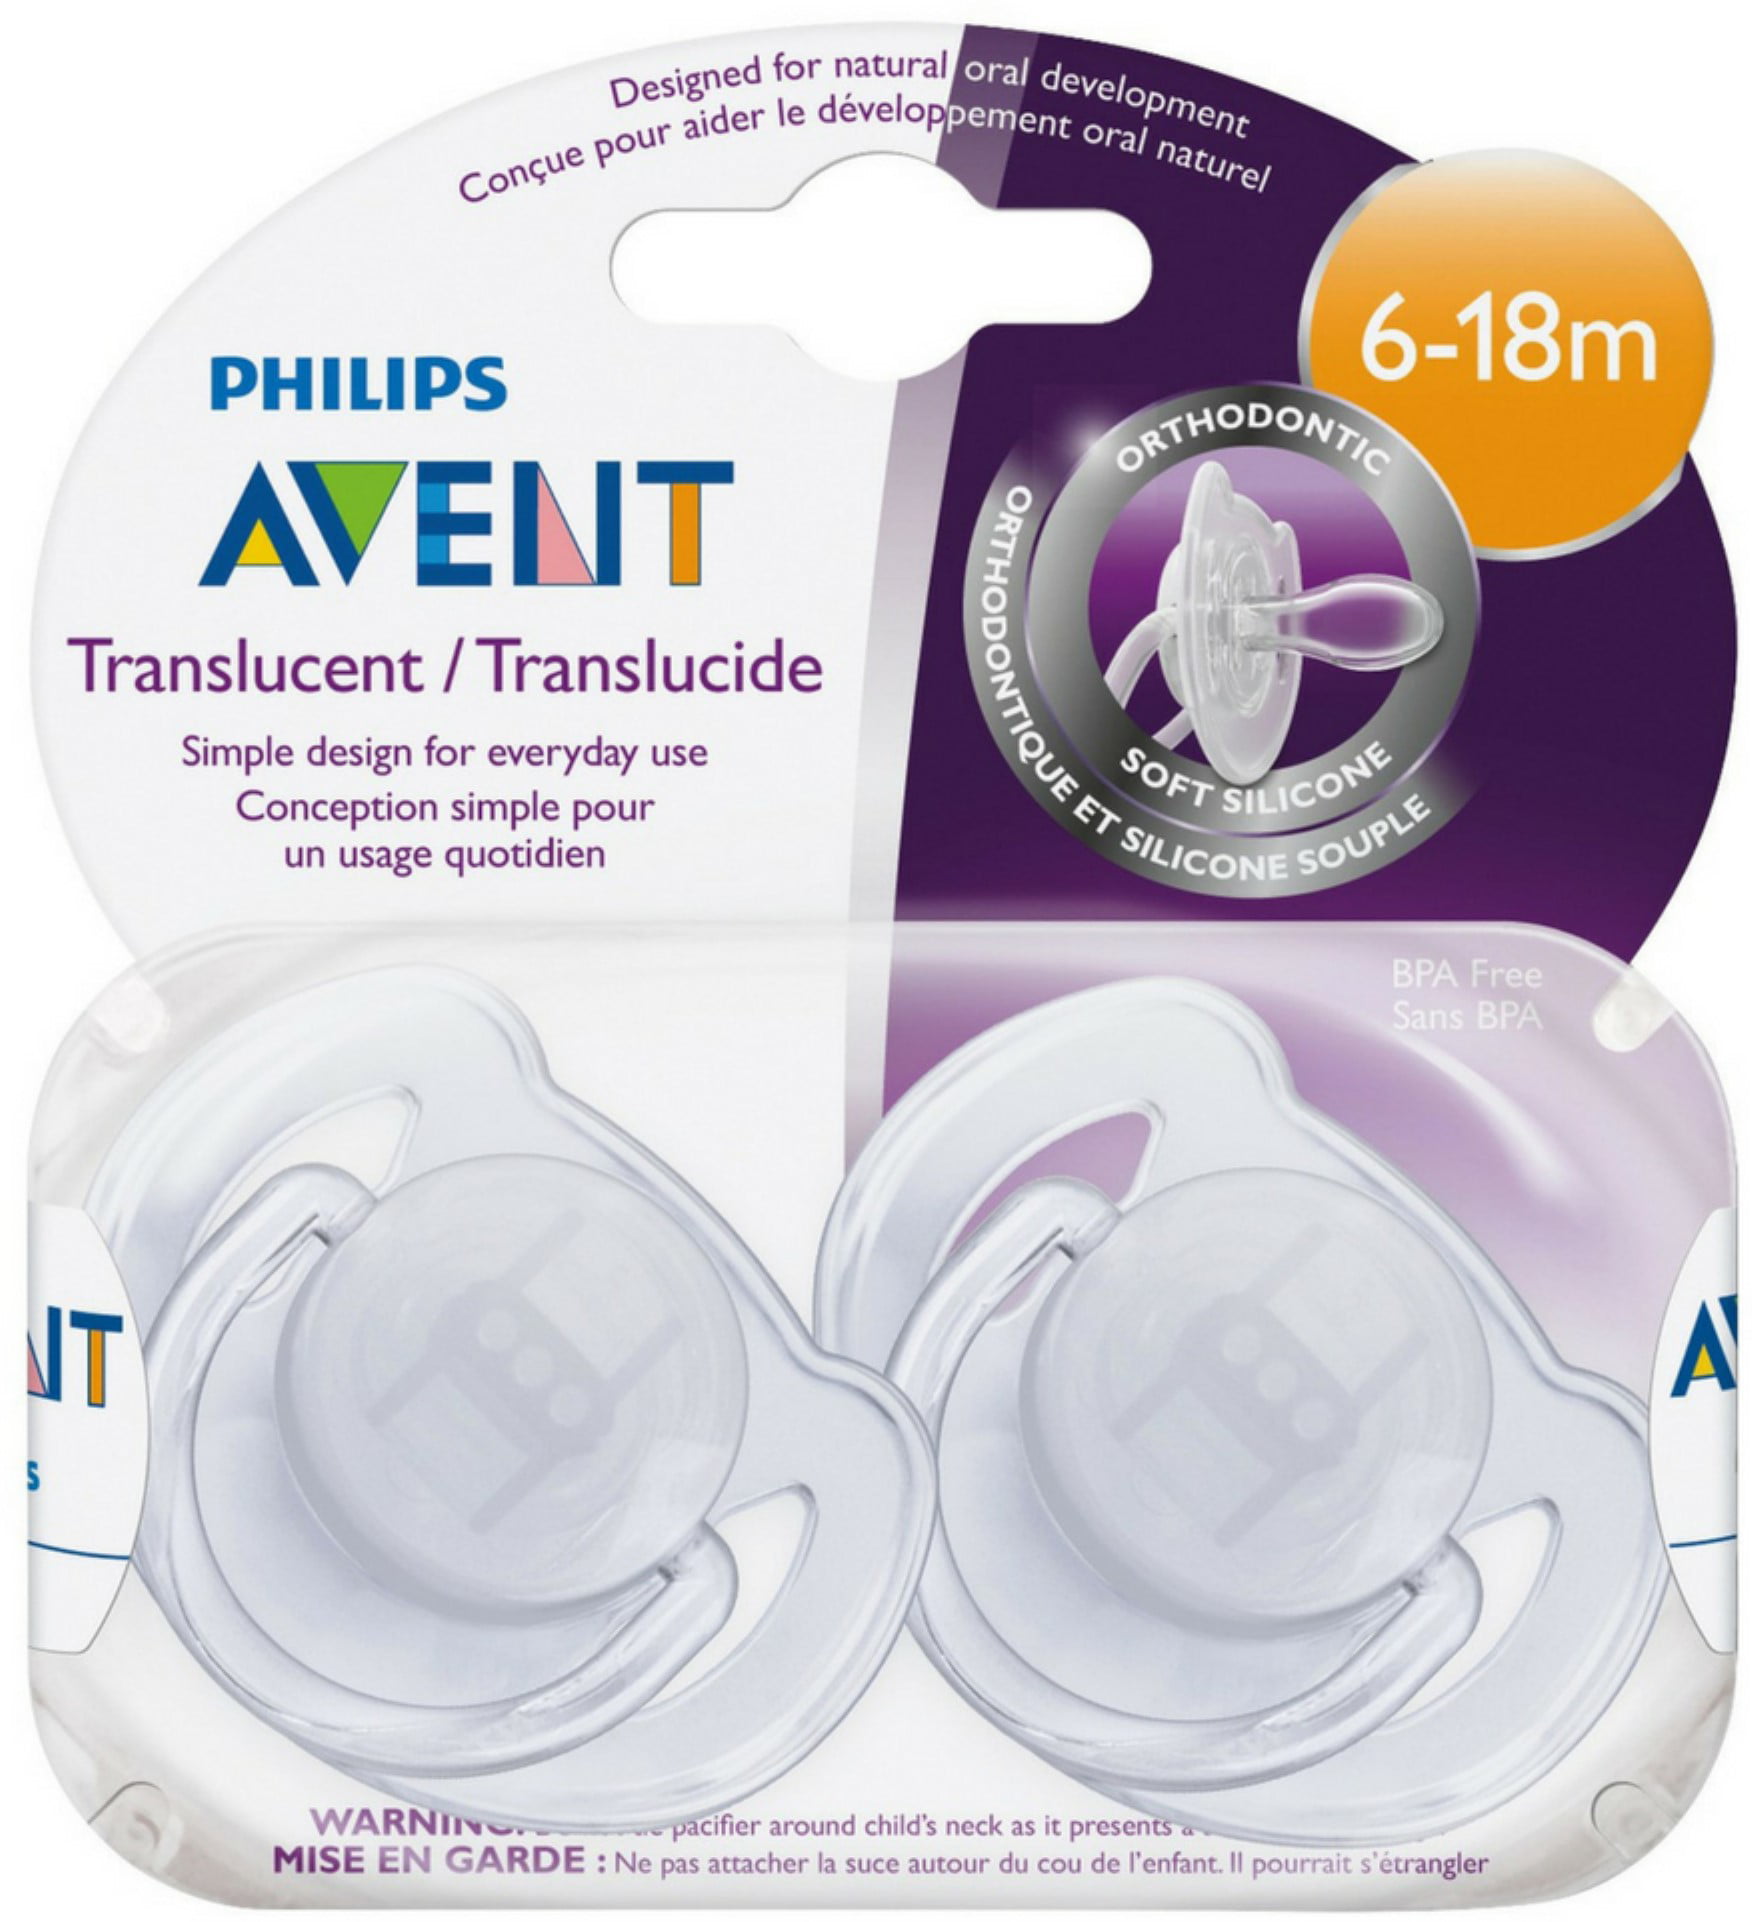 Philips AVENT Translucent Pacifier x2 Orthodontic Nipple BPA Free Size Color 